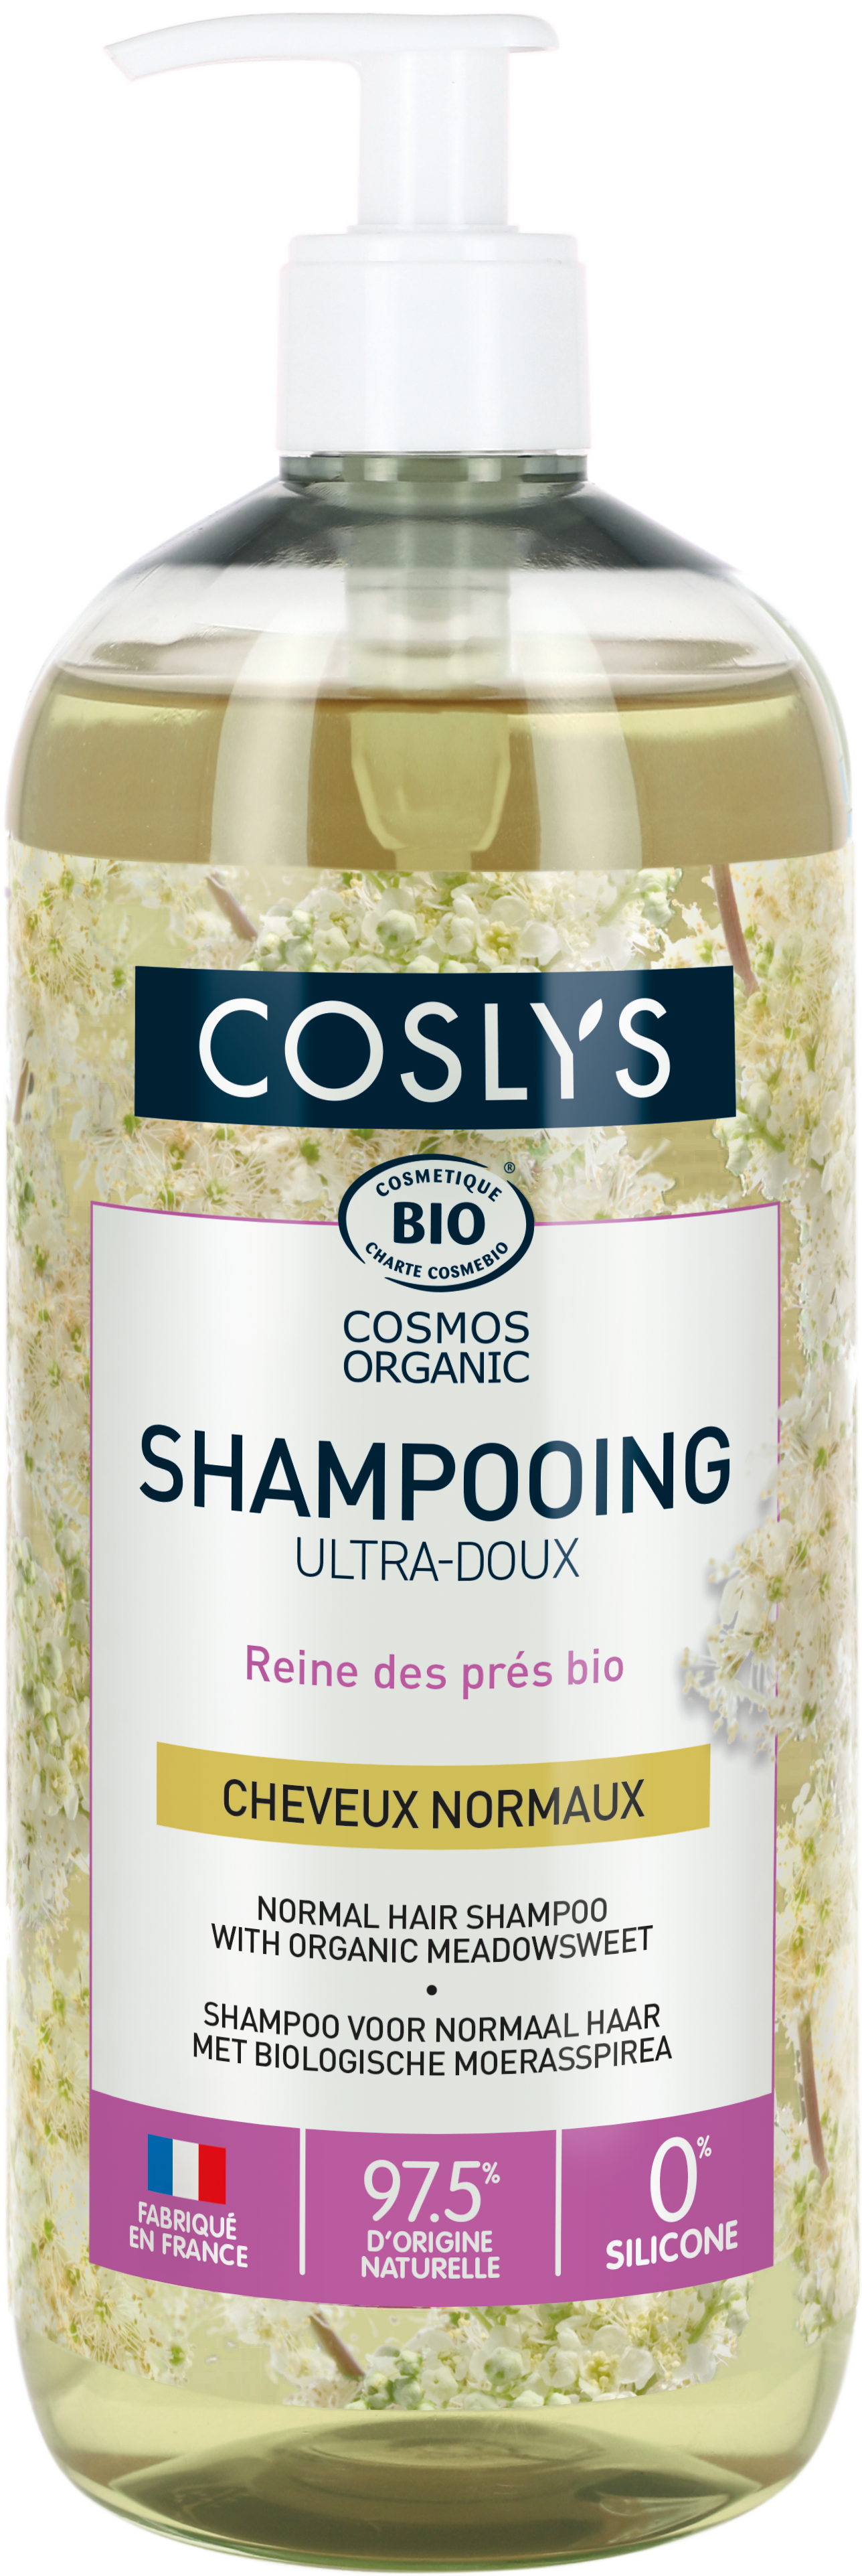 SHAMPOING CHEVEUX NORMAUX (1L) COSLYS